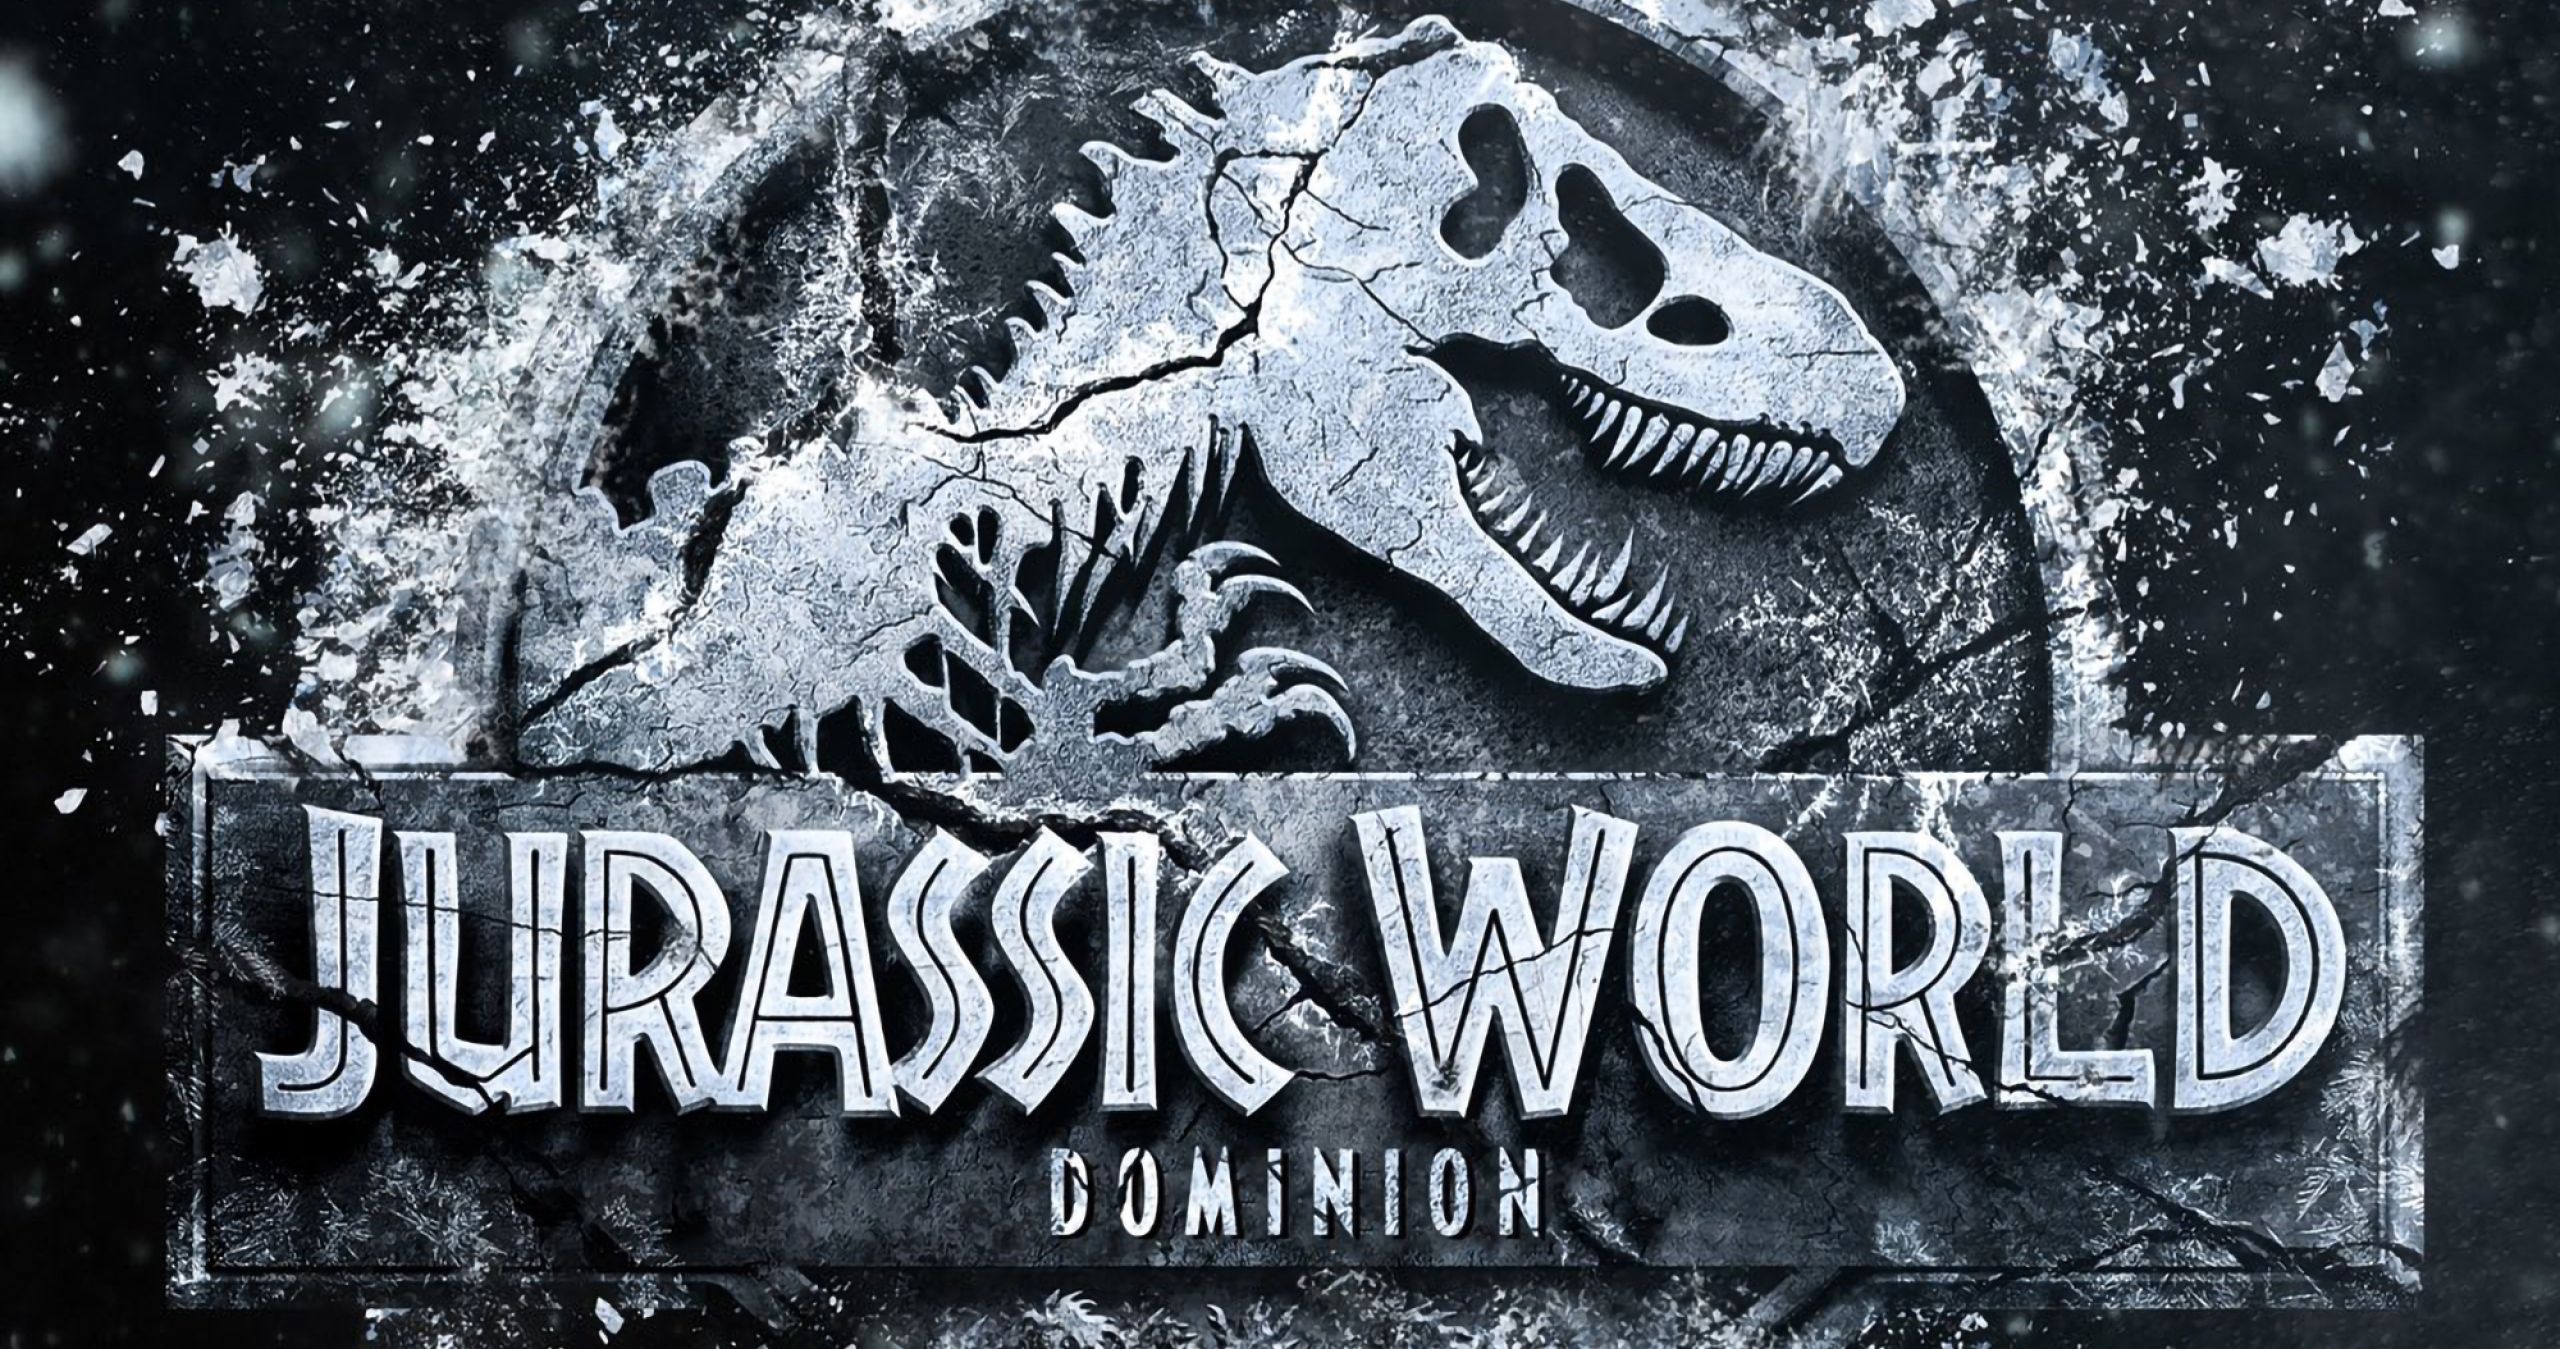 Jurassic World 3 Filming Is on Schedule, But There's Still Quite a Bit to Shoot